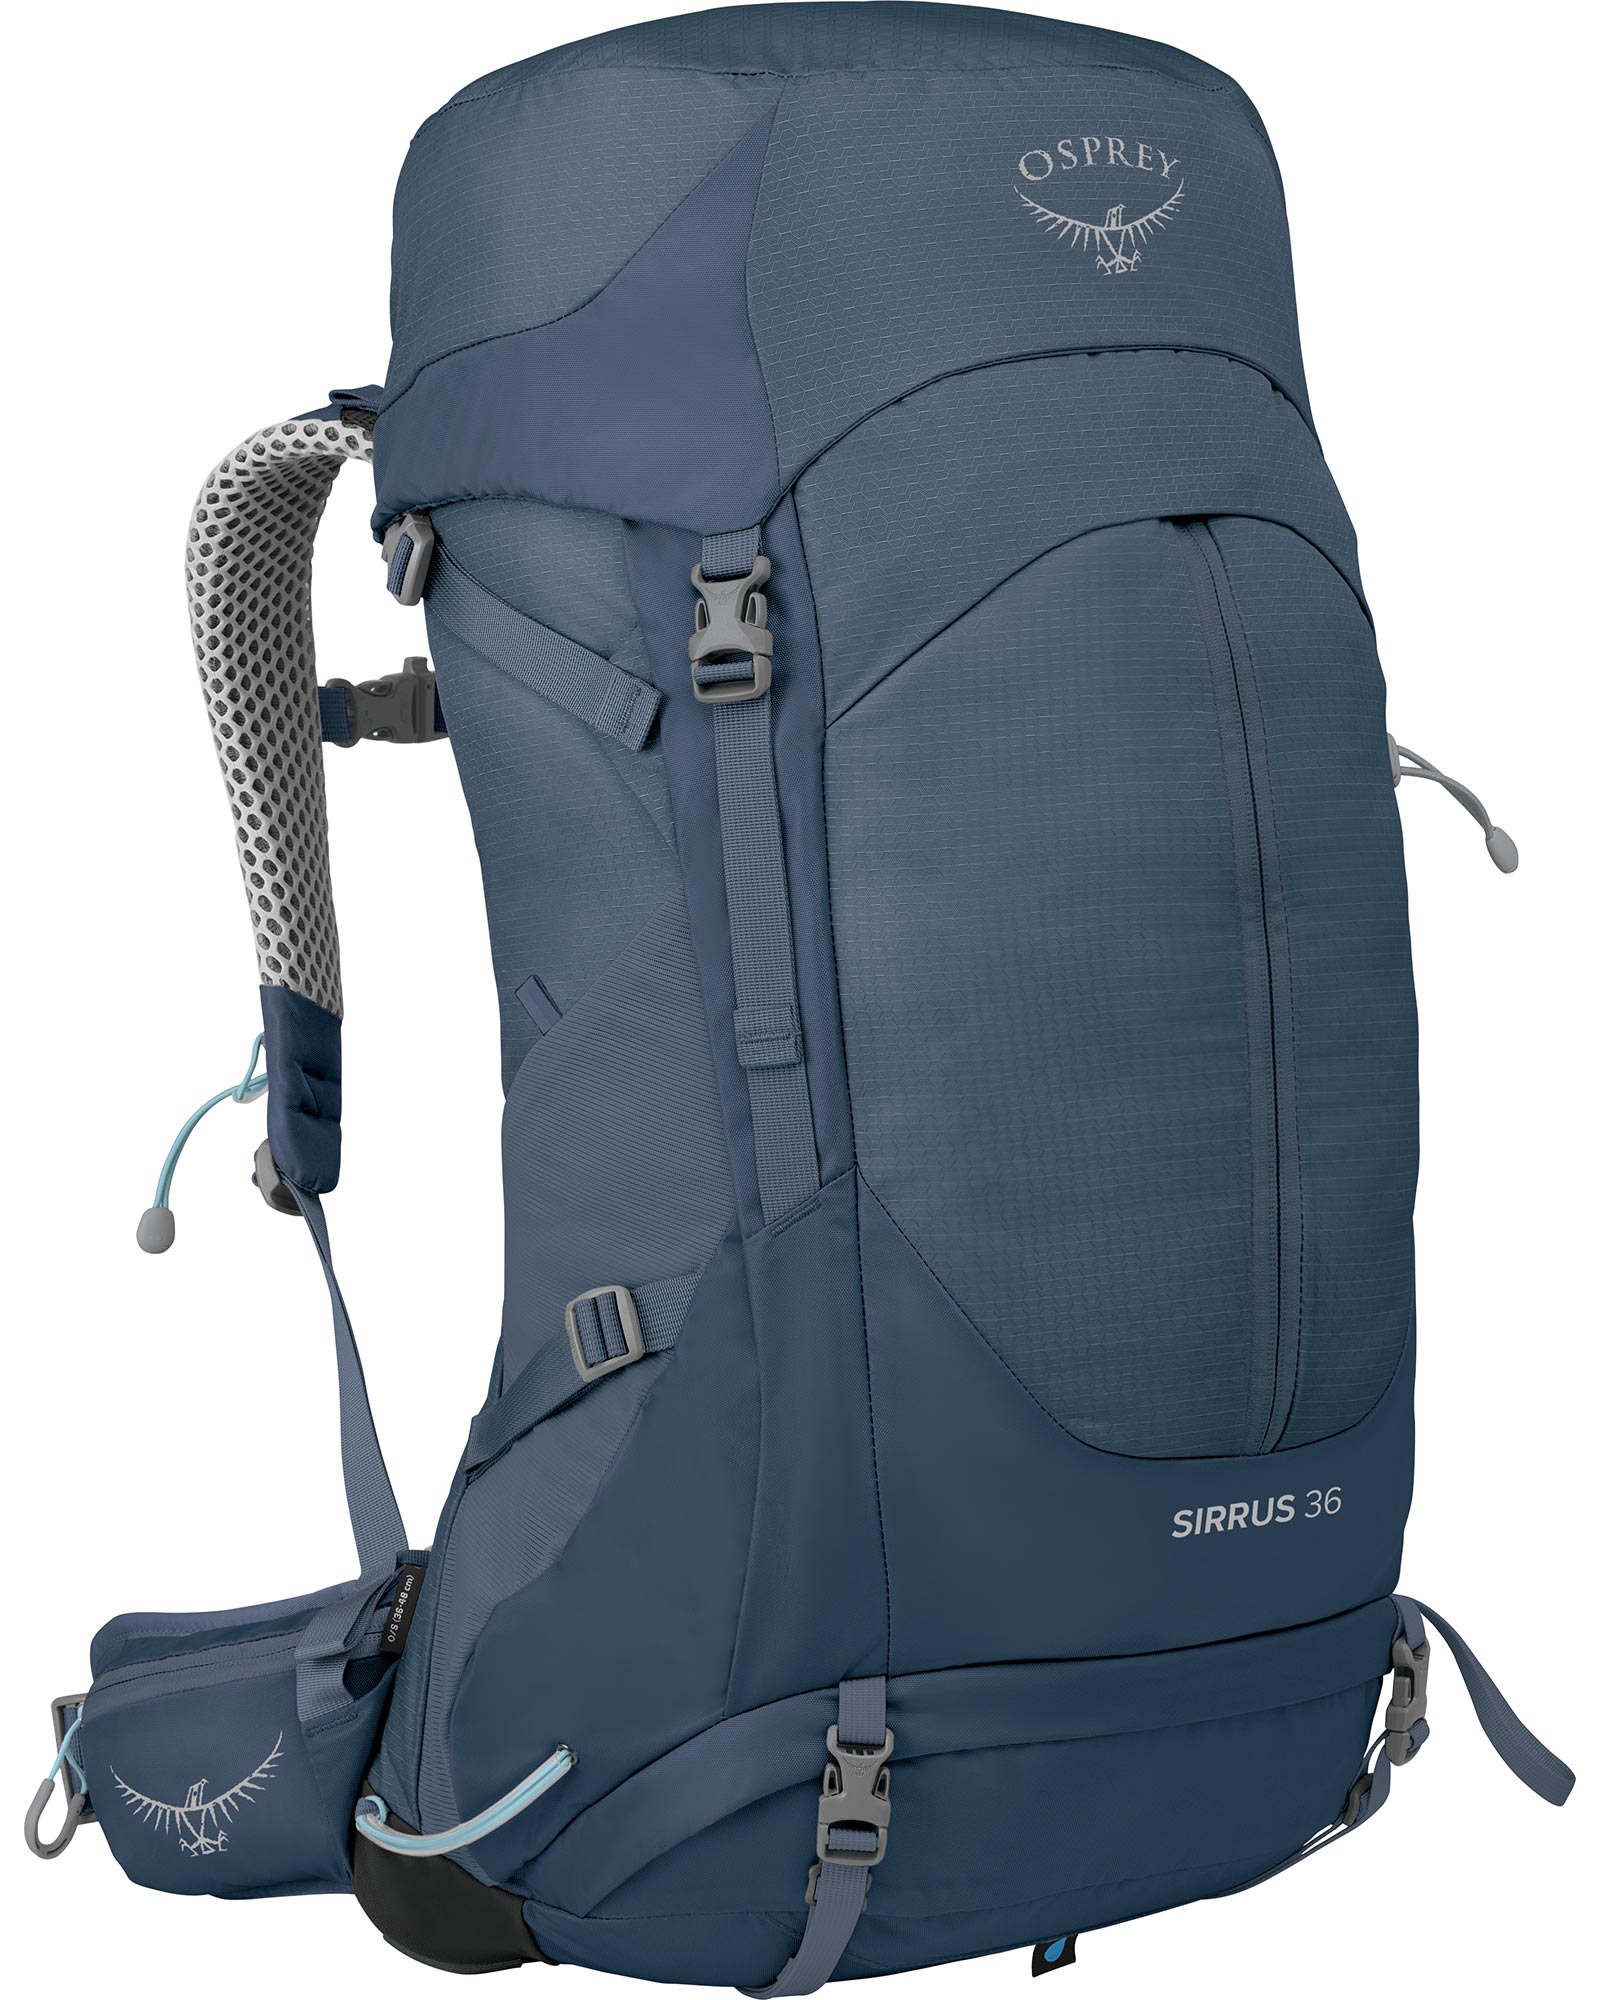 Osprey Sirrus 36 Women’s Backpack - Muted Space Blue